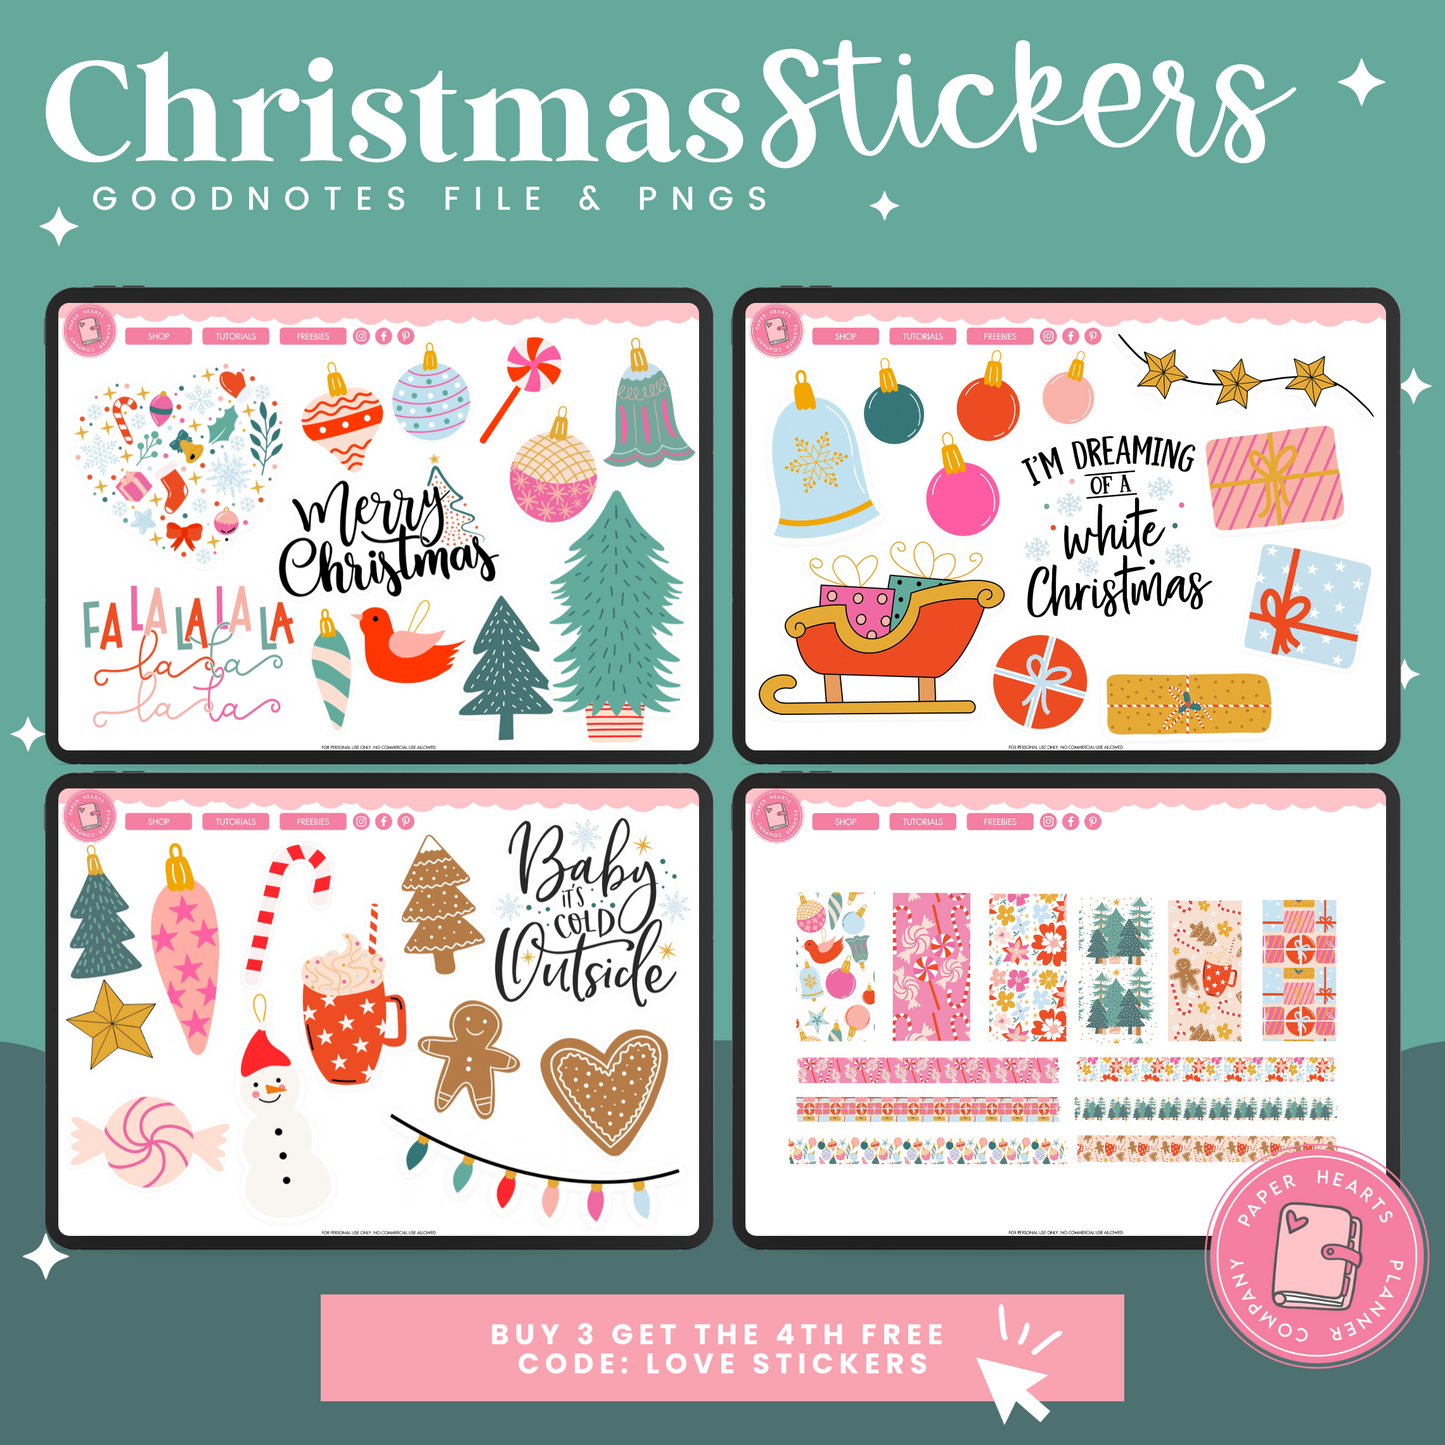 Christmas Ornament Stickers